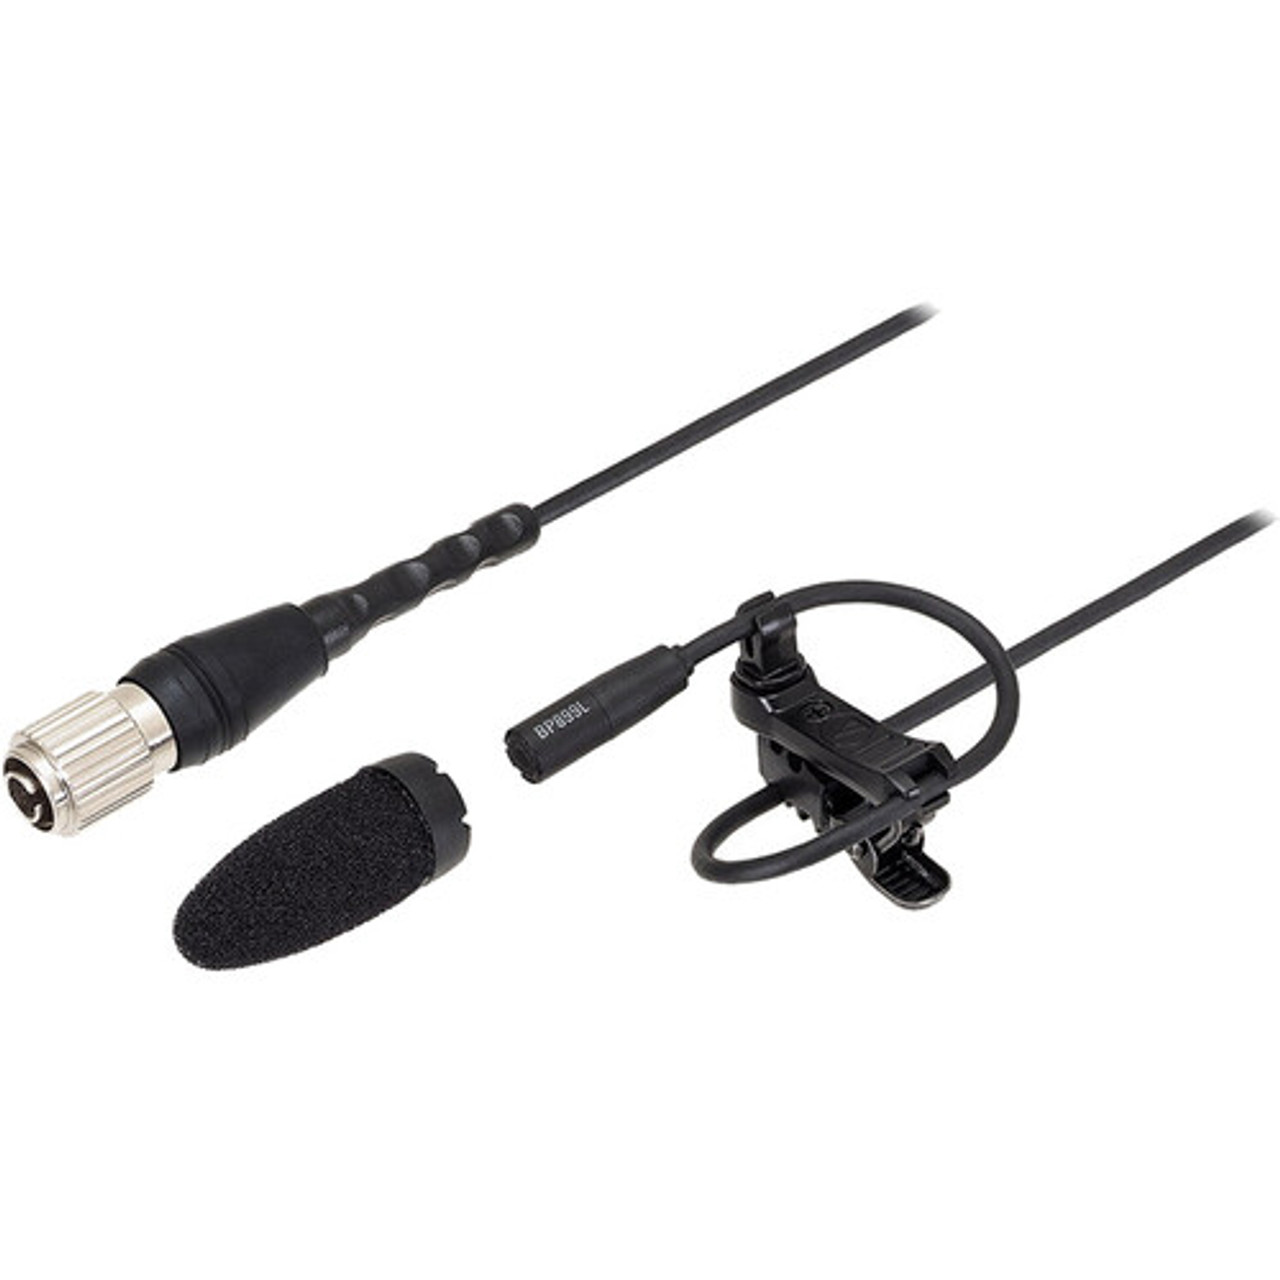 Audio-Technica BP899LcH Subminiature Omnidirectional Lavalier Microphone (BP899LCH)